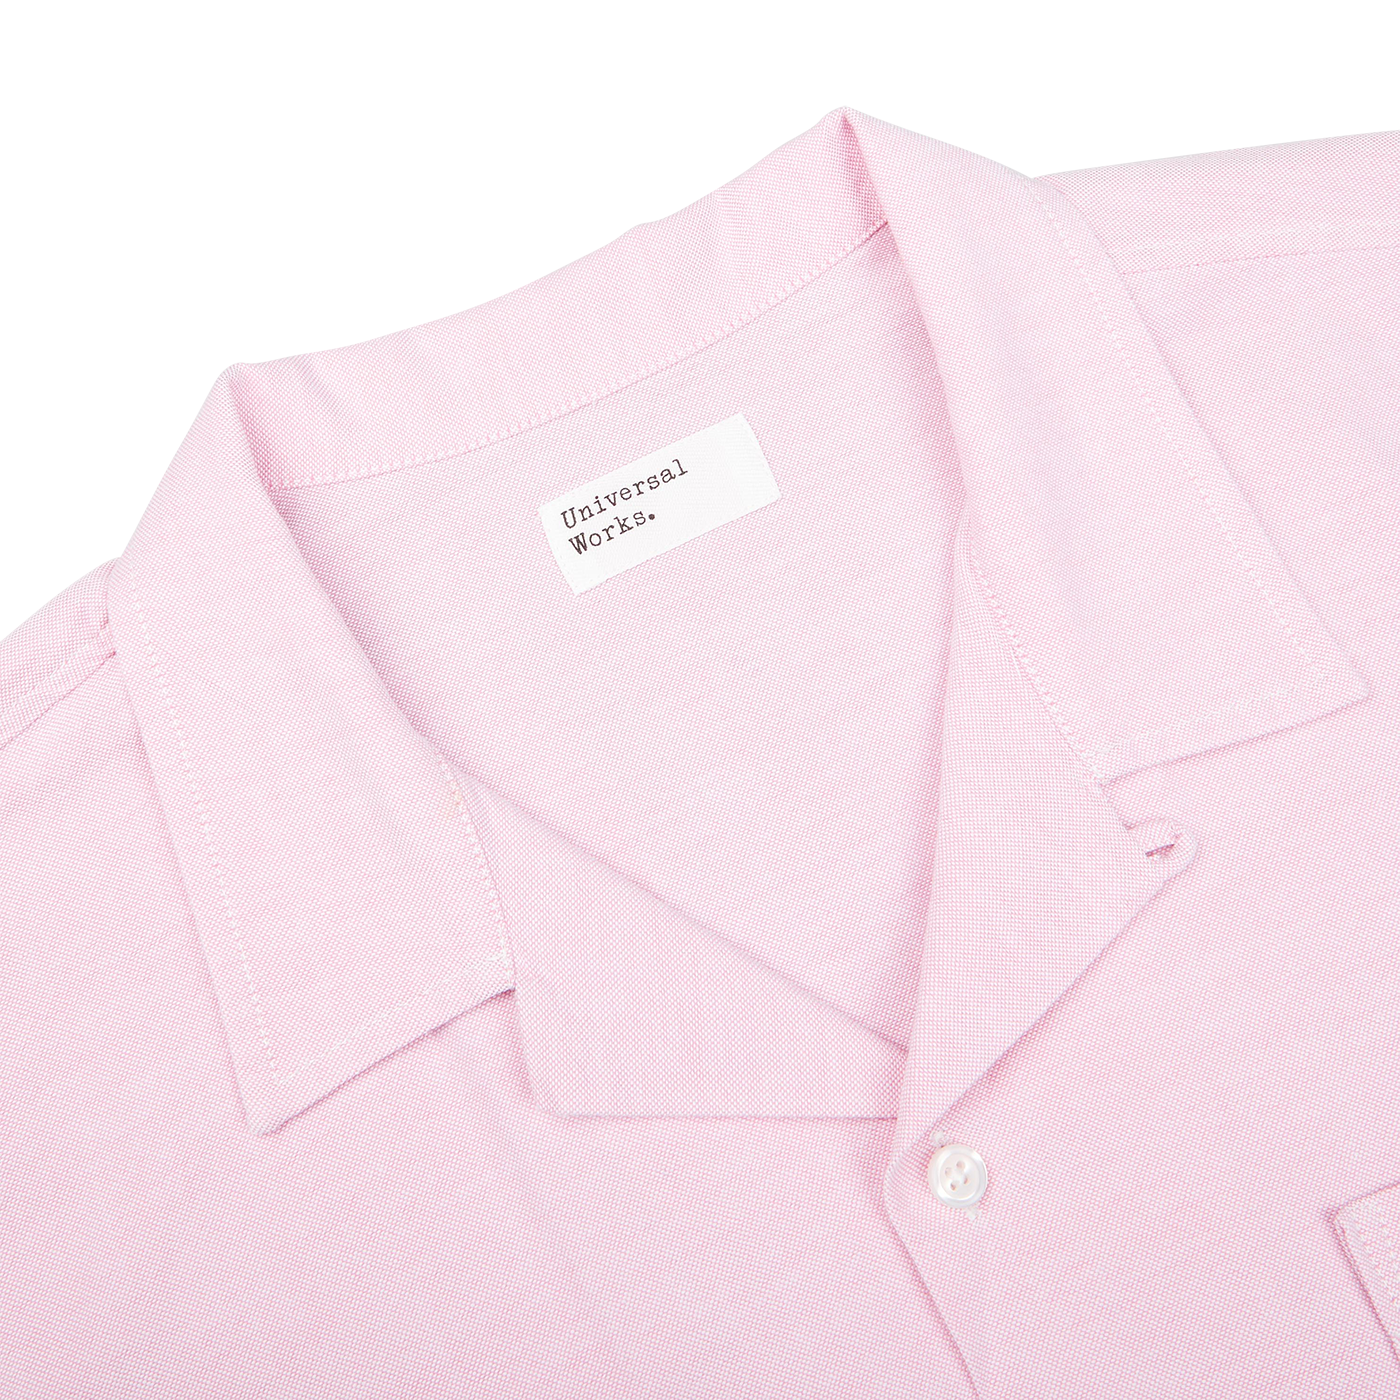 The Pink Cotton Oxford Camp Collar Road Shirt by Universal Works.